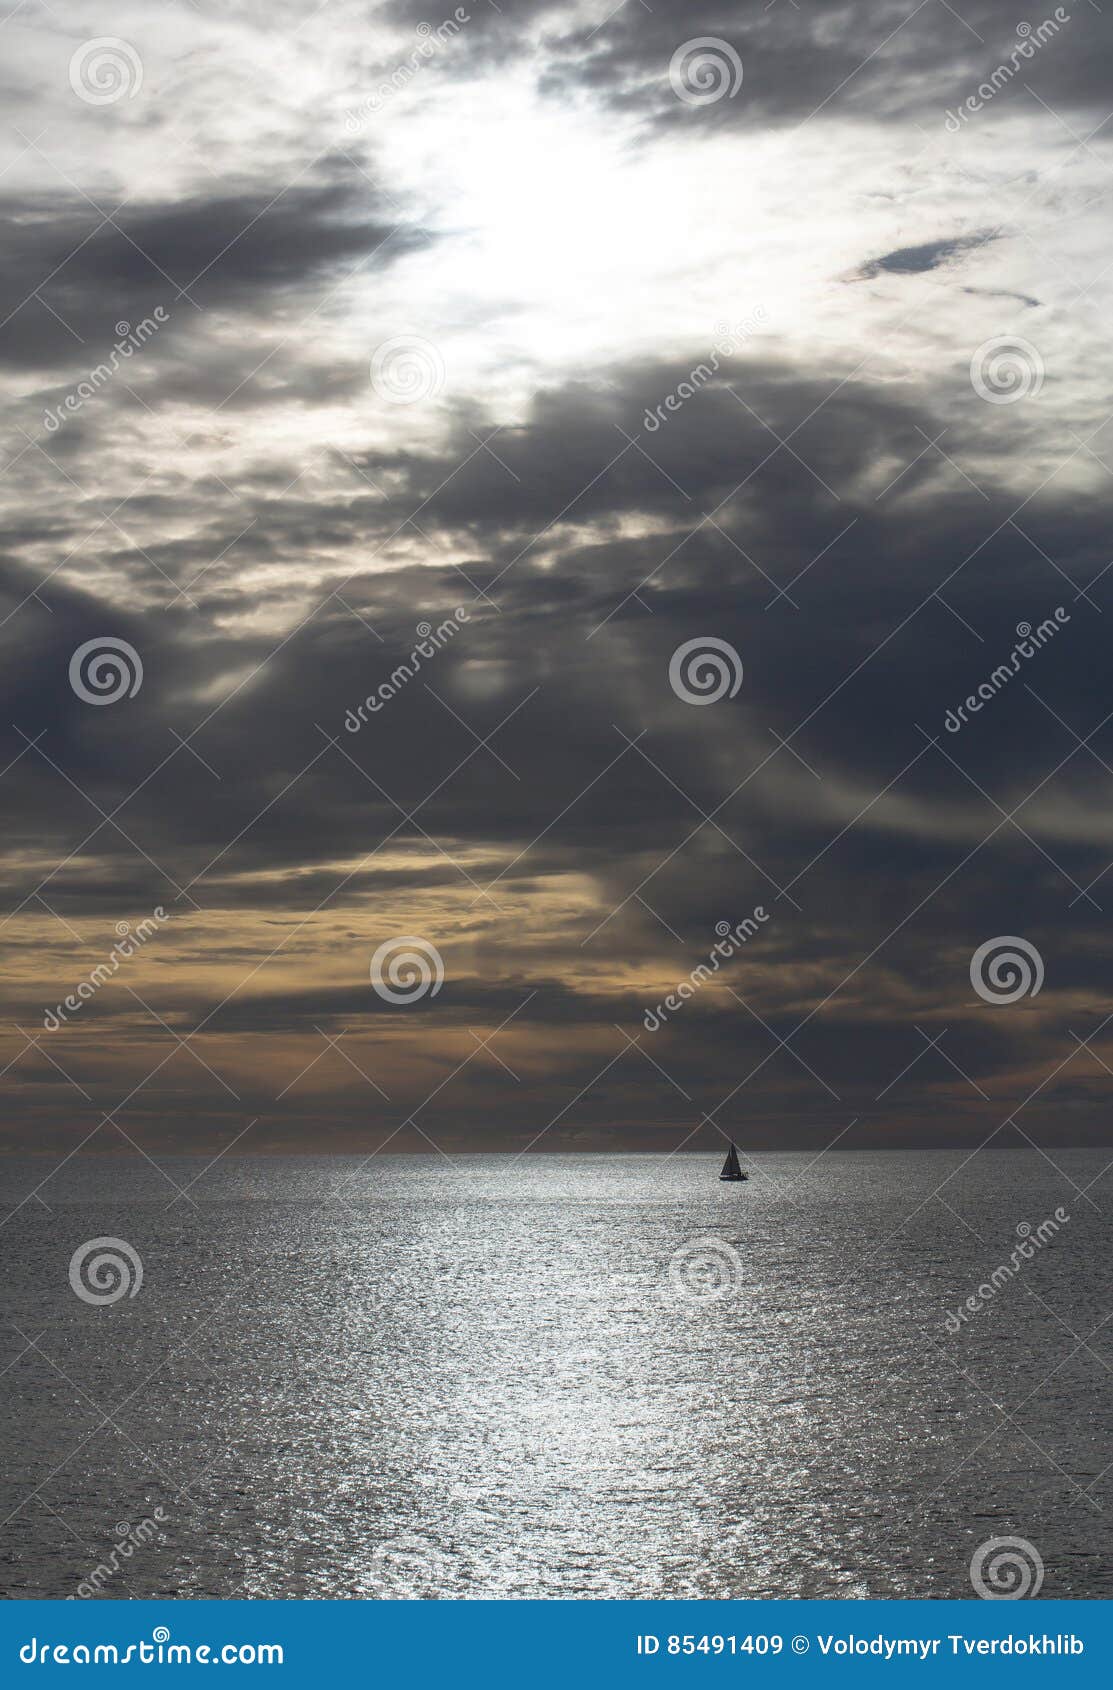 Dramatic Evening Seascape with Sailing Boat on Dark Sea Stock Image ...